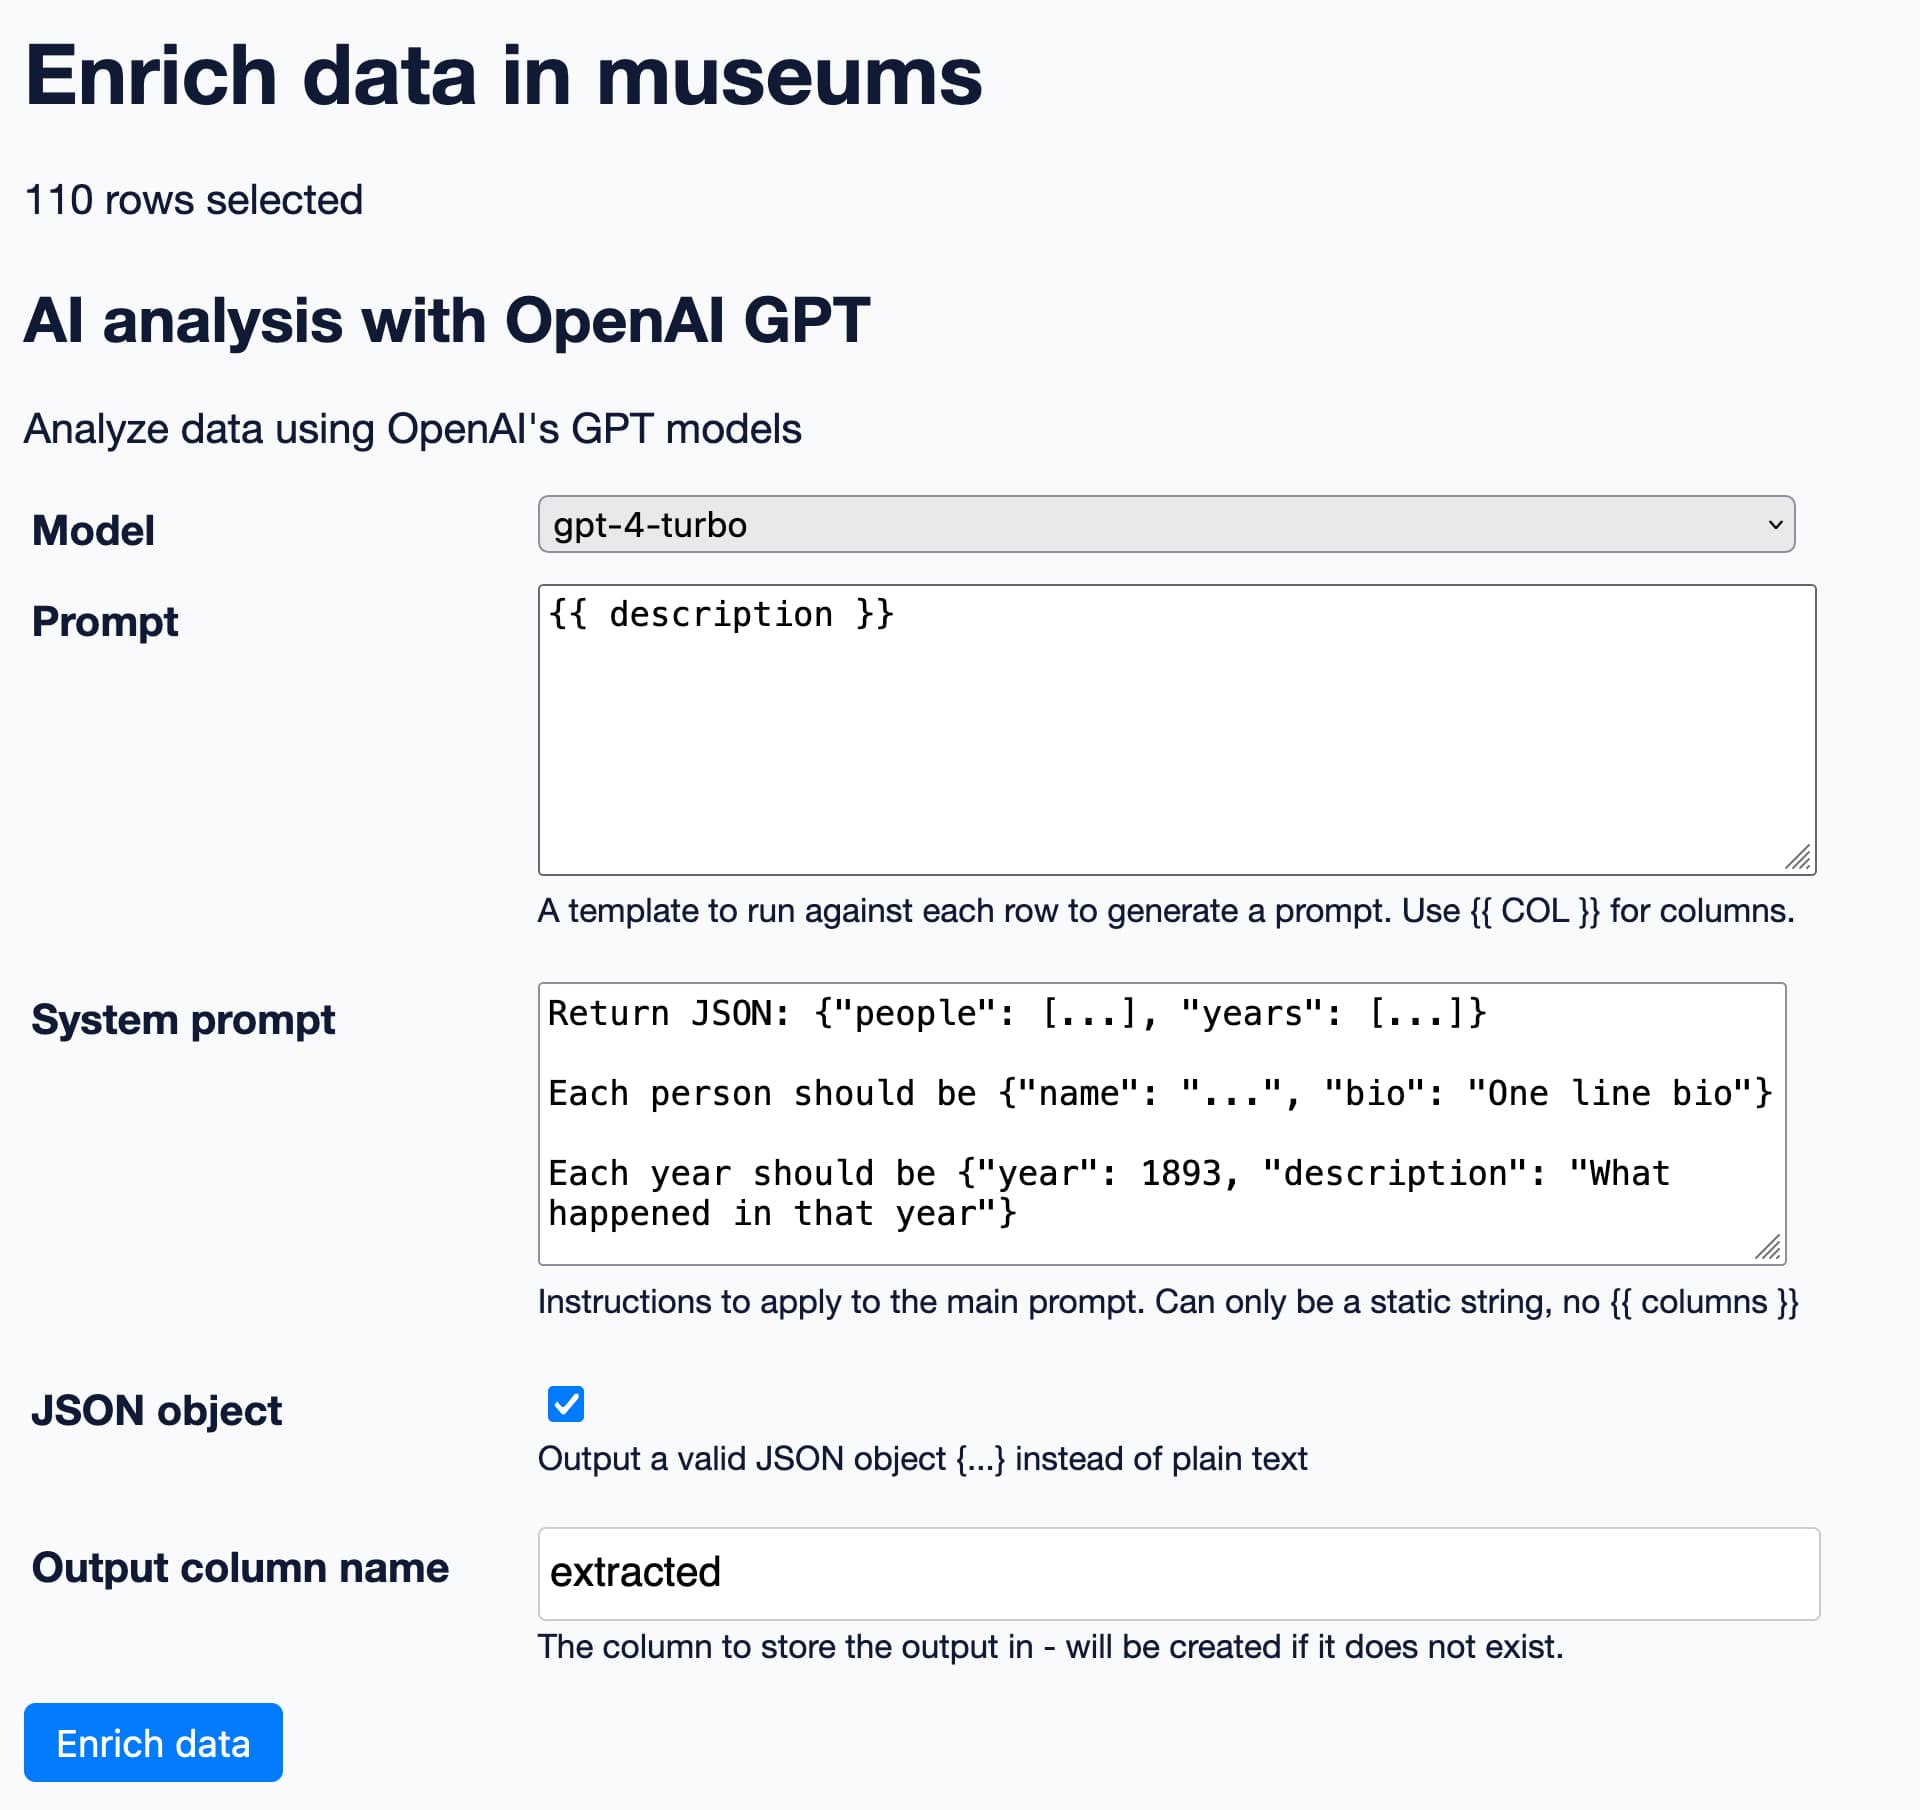 Enrich data in museums. 110 rows selected. AI analysis with OpenAI GPT. Model gpt-4-turbo. Prompt {{ description }}. System prompt: Return JSON: {"people": ..., "years": ...} Each person should be {"name": "...", "bio": "One line bio"} Each year should be {"year": 1893, "description": "What happened in that year"}. JSON output is selected, output column name is extracted.